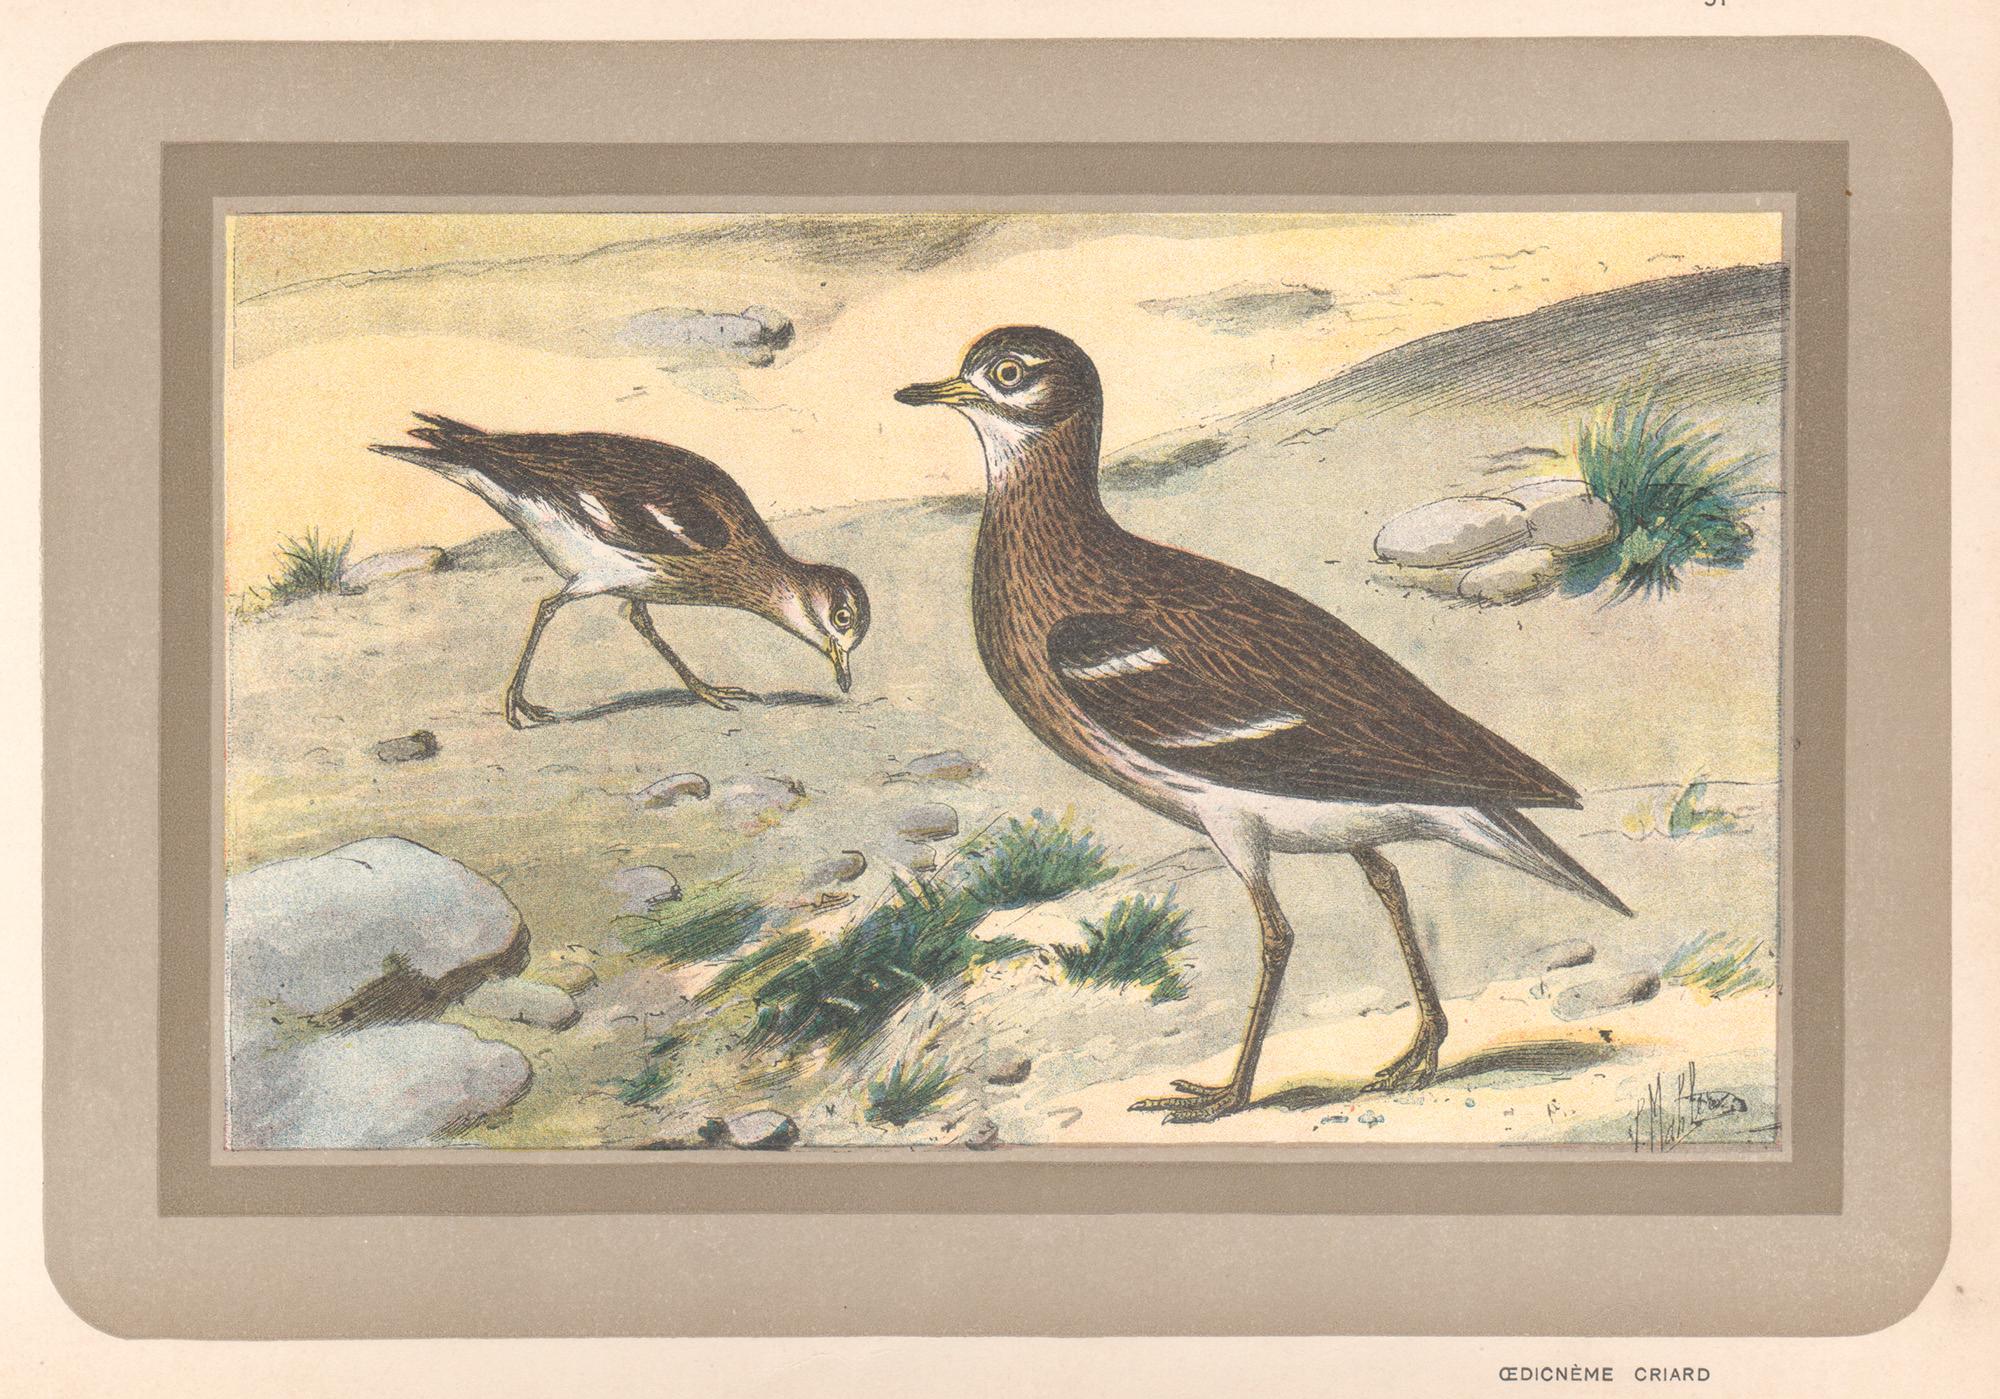 Unknown Animal Print - Eurasian Stone Curlew, French antique natural history water bird art print